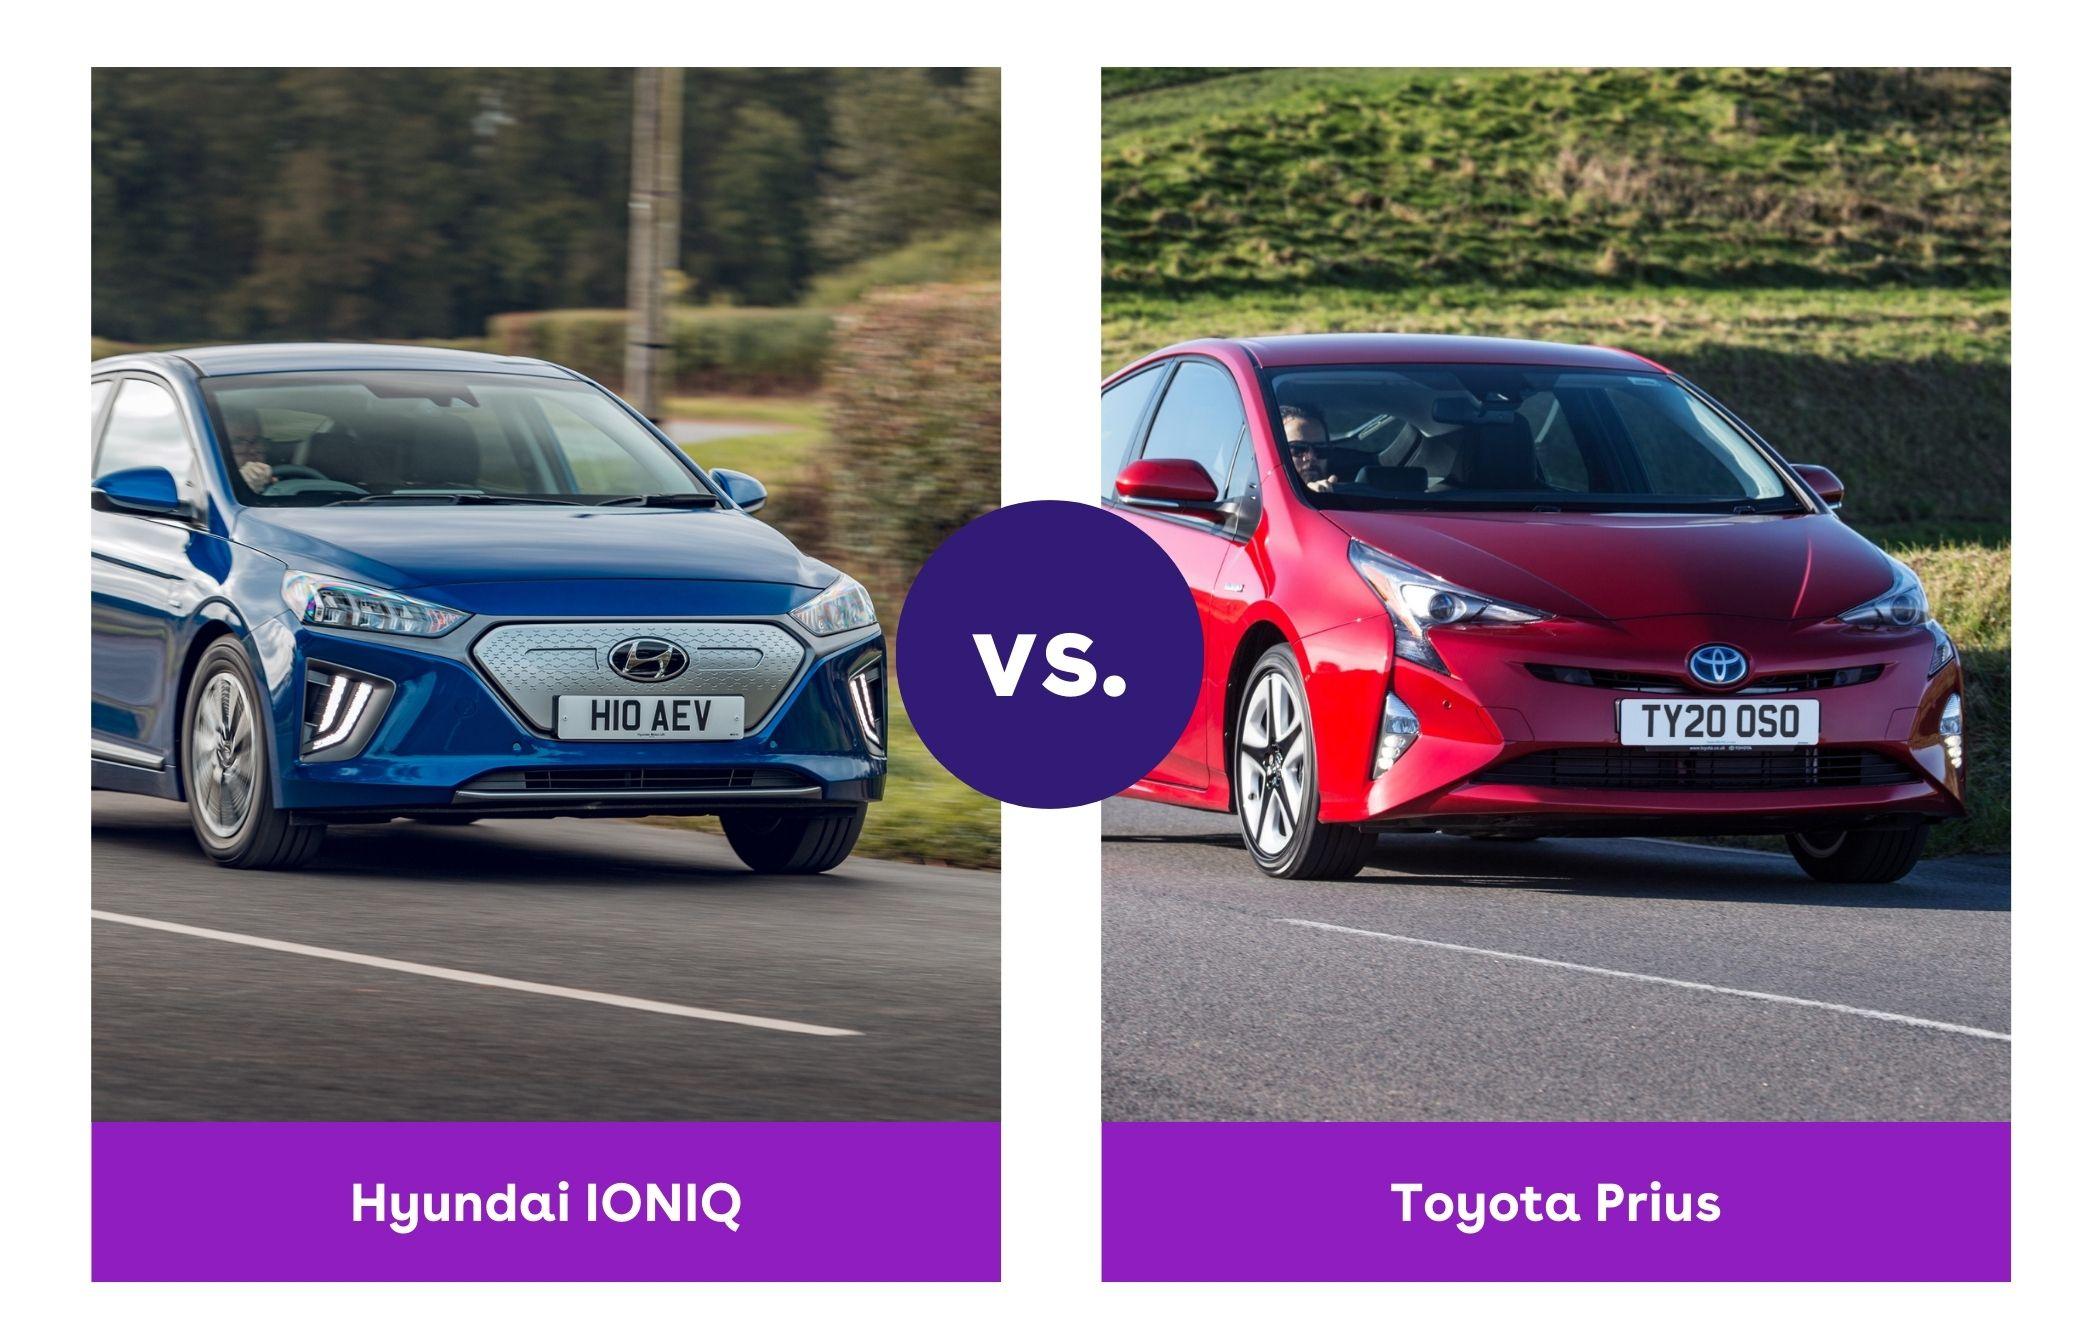 Side-by-side image of Hyundai IONIQ and Toyota Prius